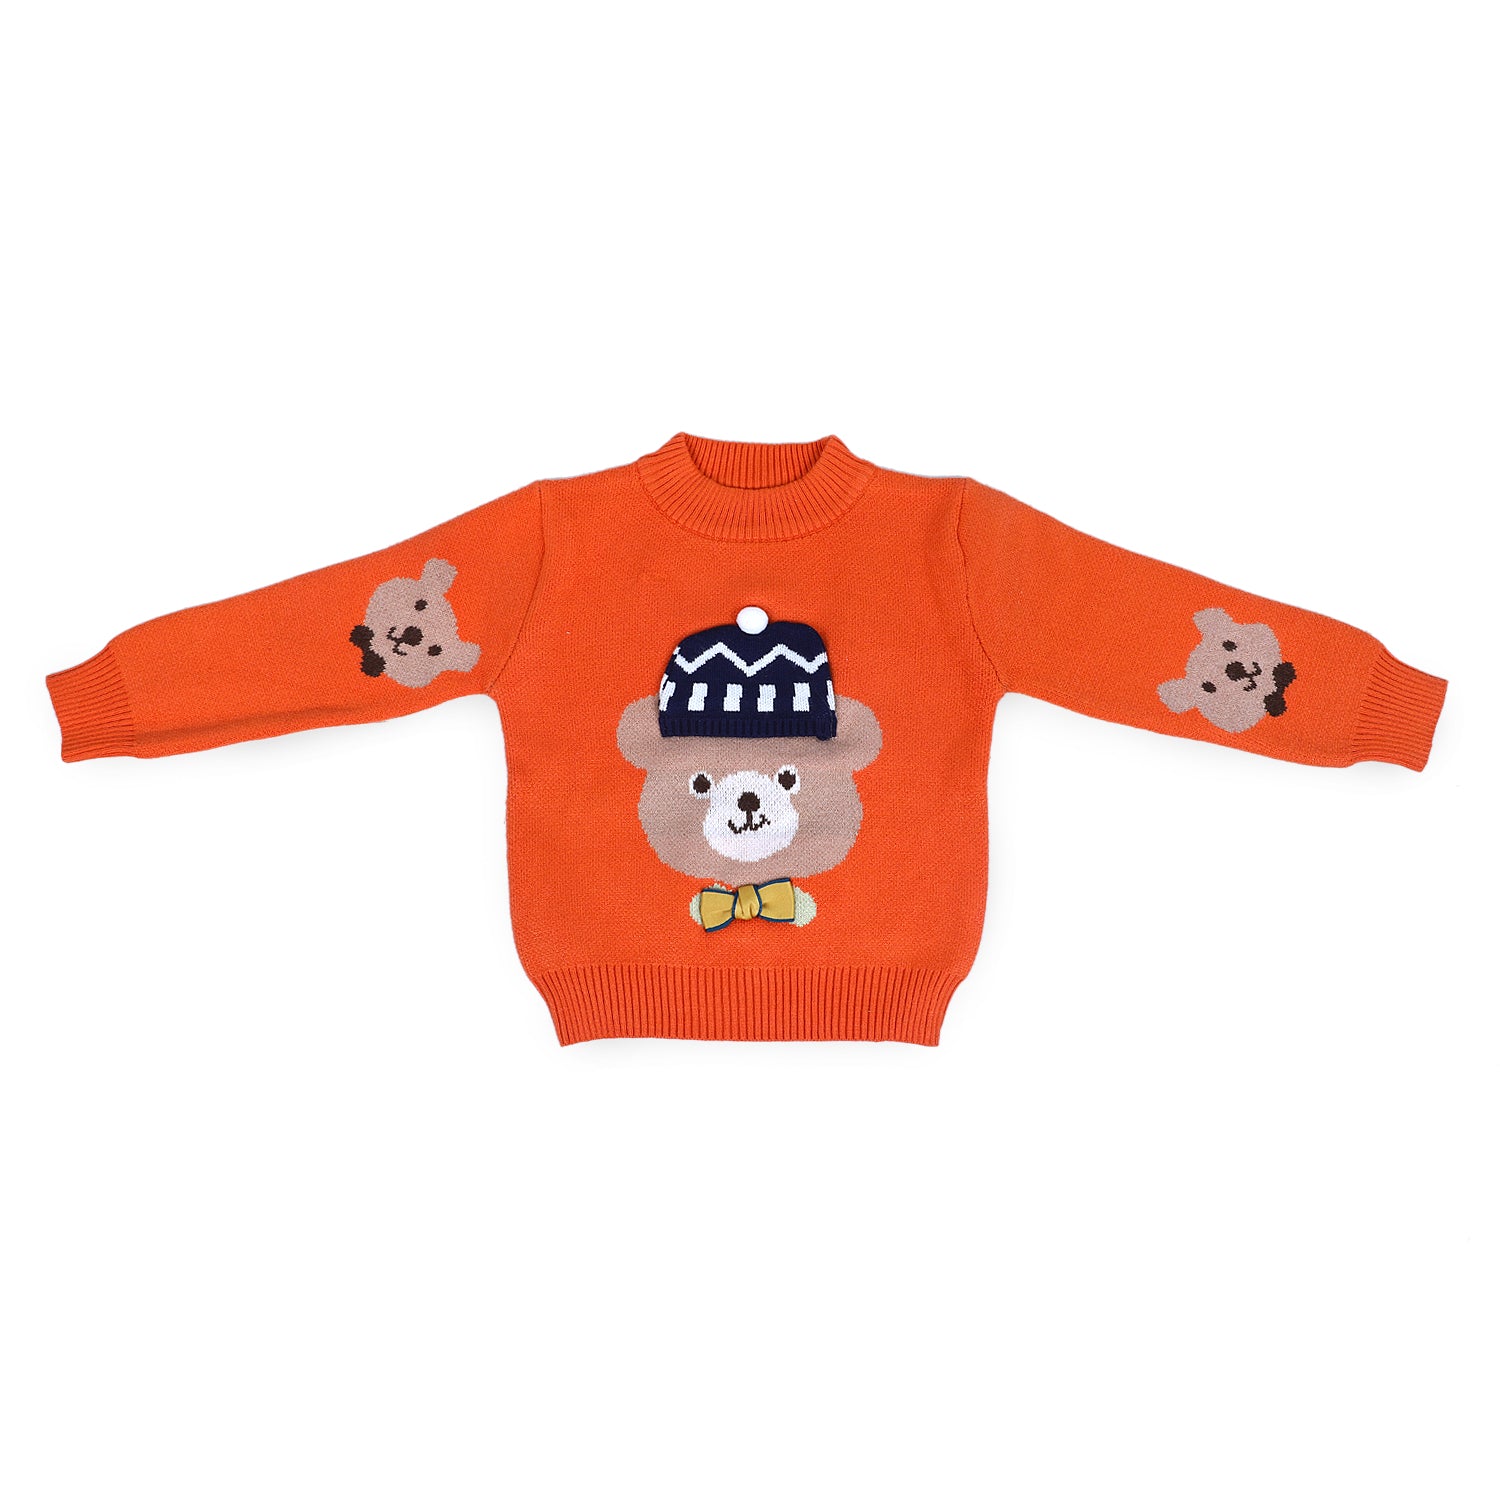 Mr. Bear Premium Full Sleeves Knitted Sweater With 3D Applique - Orange - Baby Moo